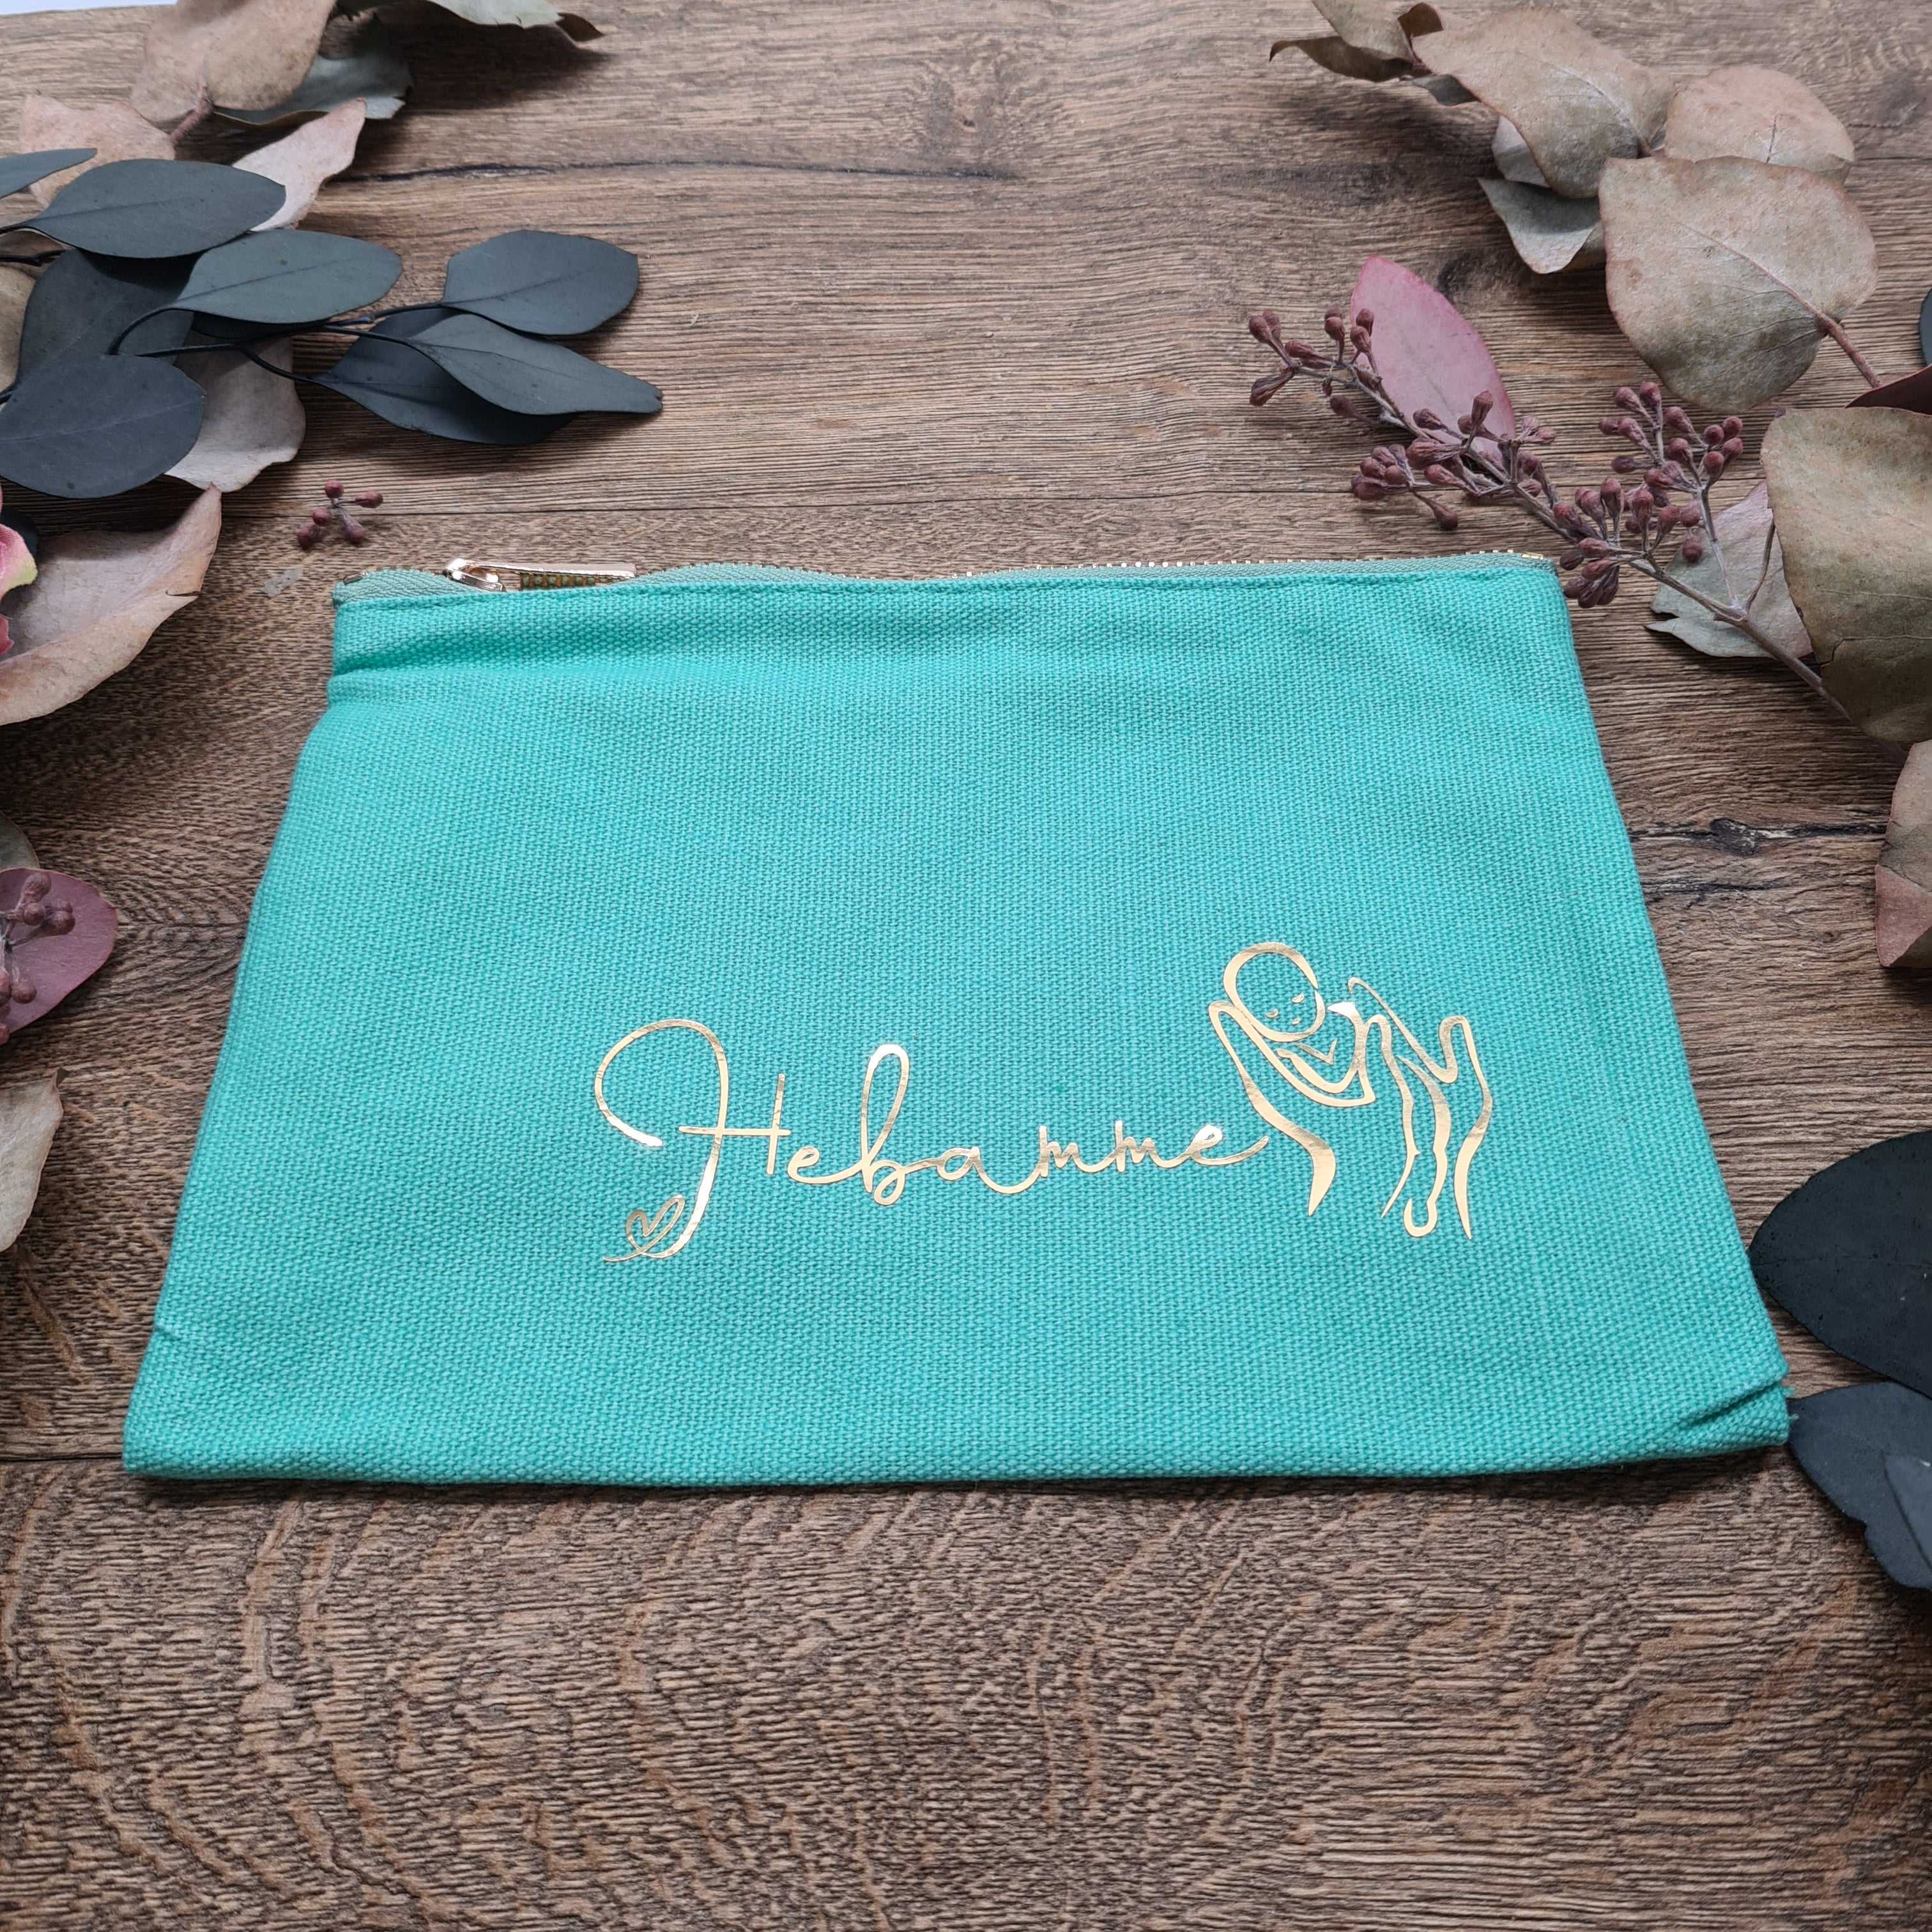 "midwife" gift | Green cotton bag with metallic gold